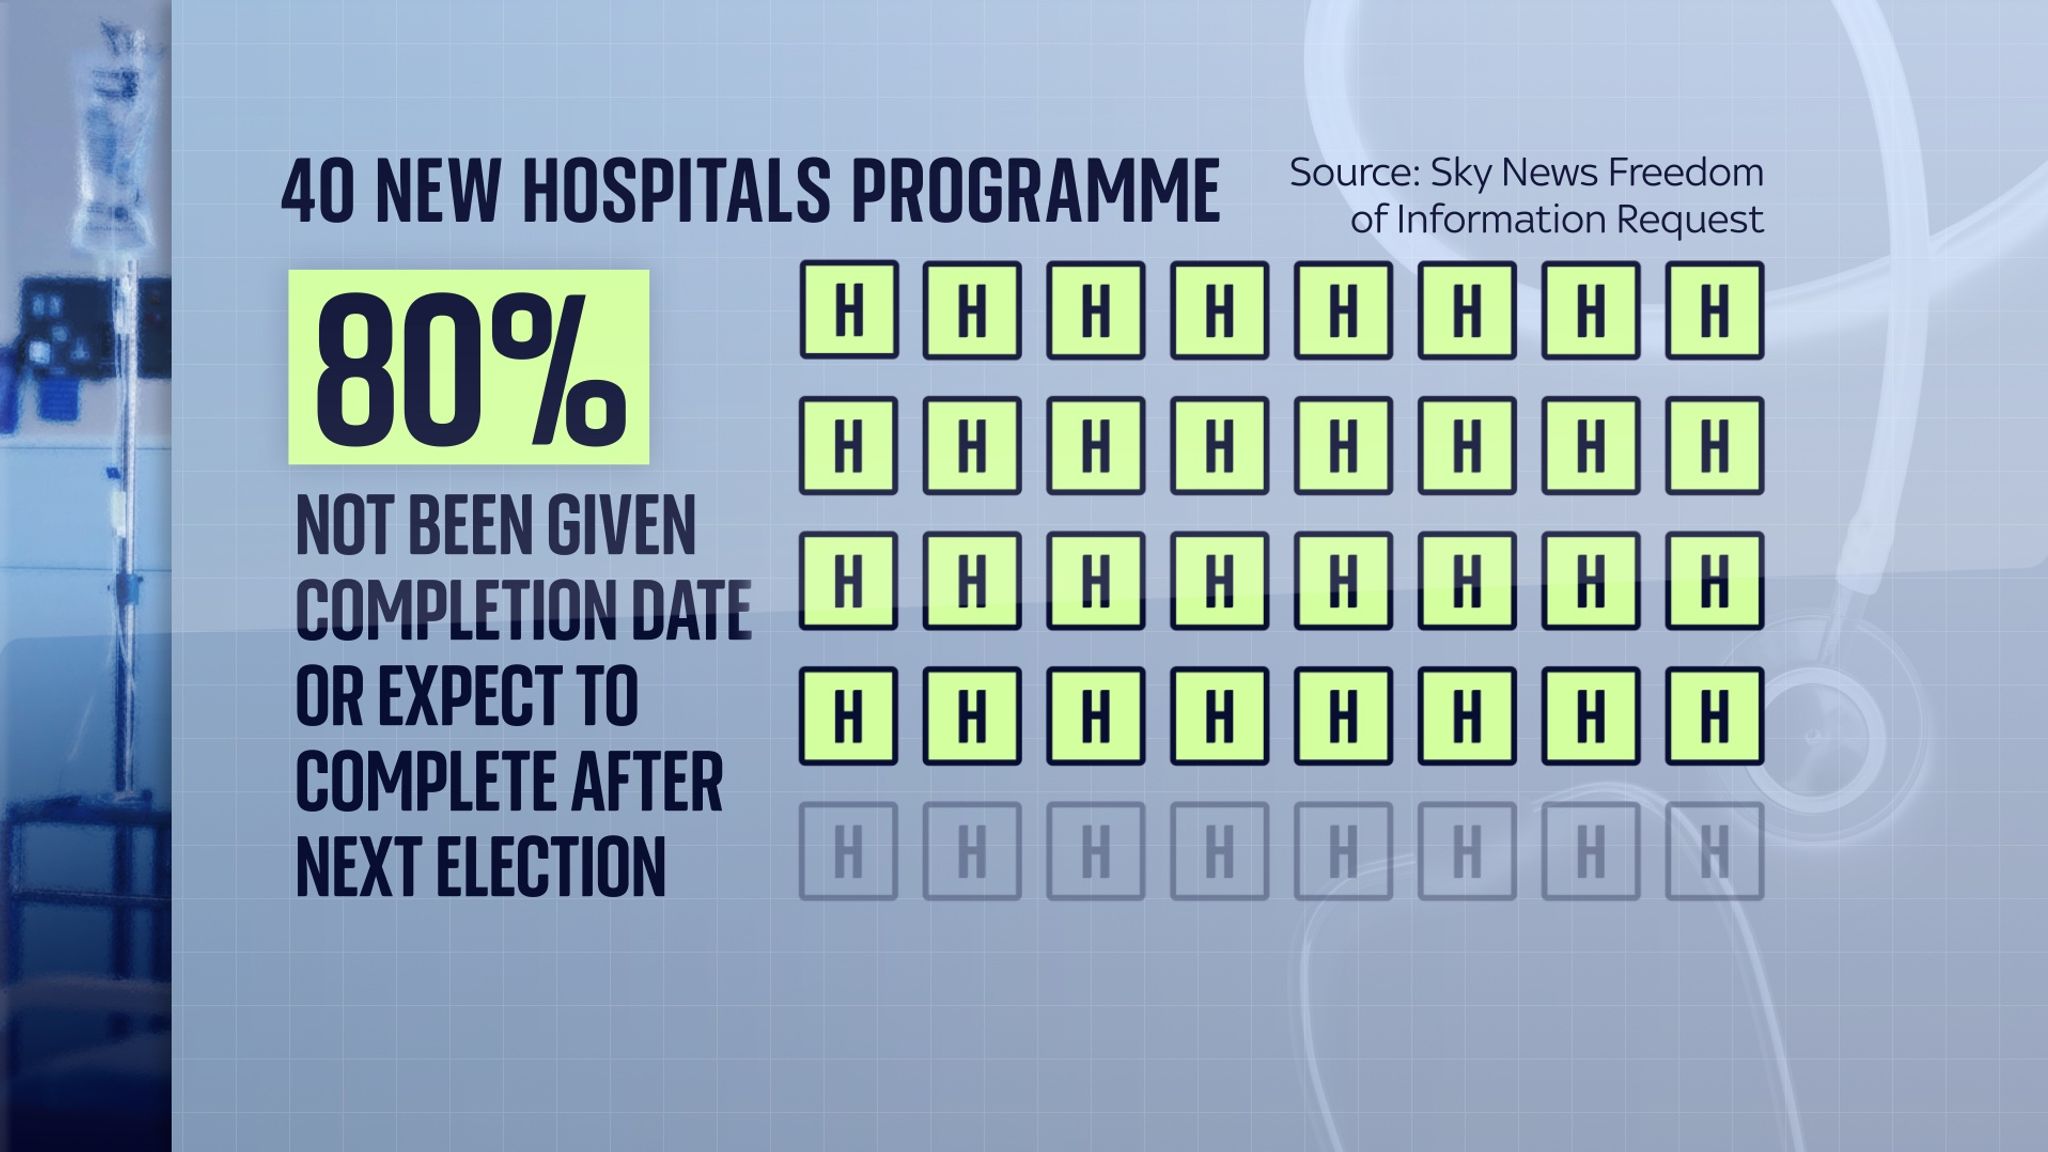 Majority Of 40 New Hospitals Promised By Boris Johnson In 2019 Unlikely To Be Finished By Next 4658